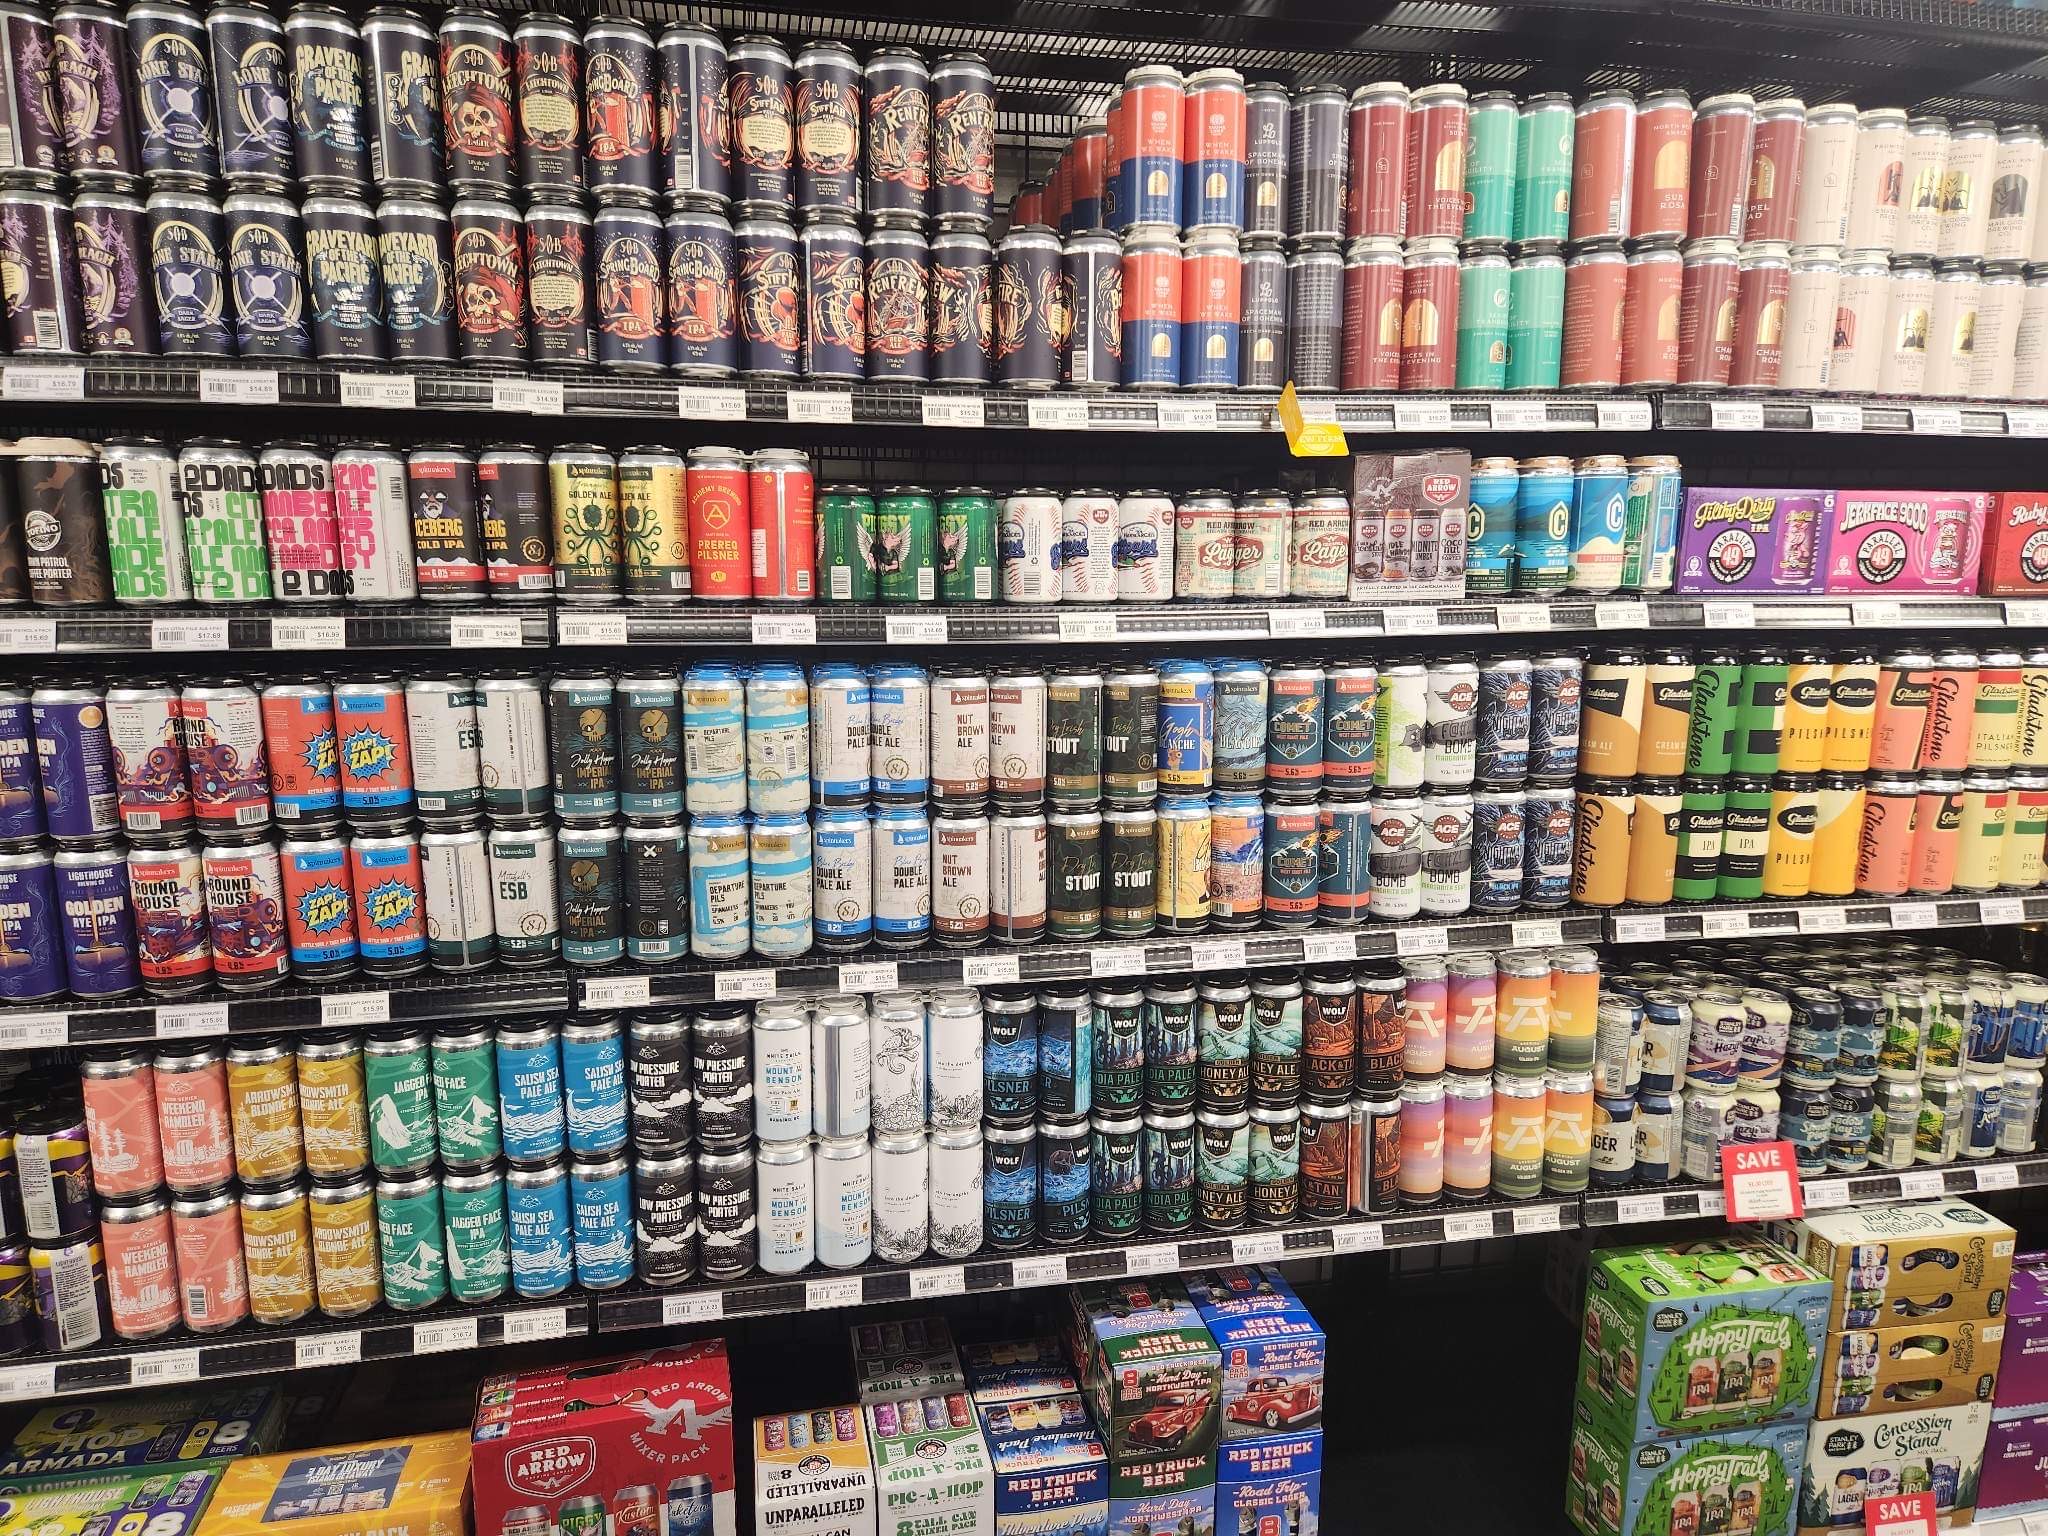 A wall of local beers in Victoria, B.C. Photo by Brennan Shaver.